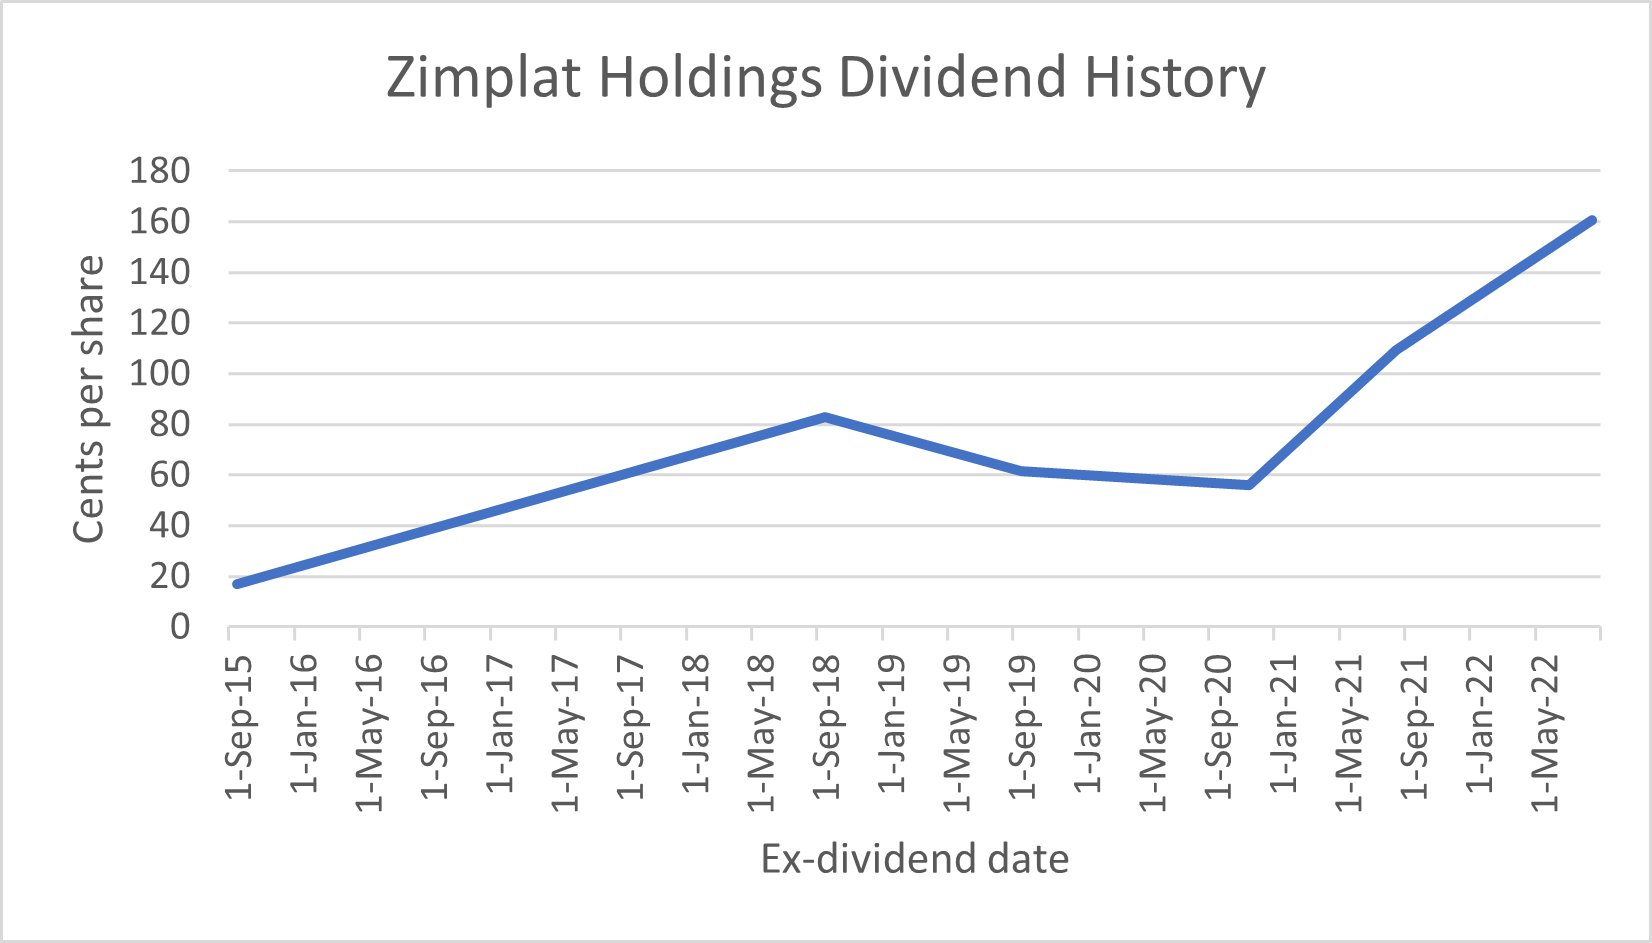 Zimplat Holdings Dividend History